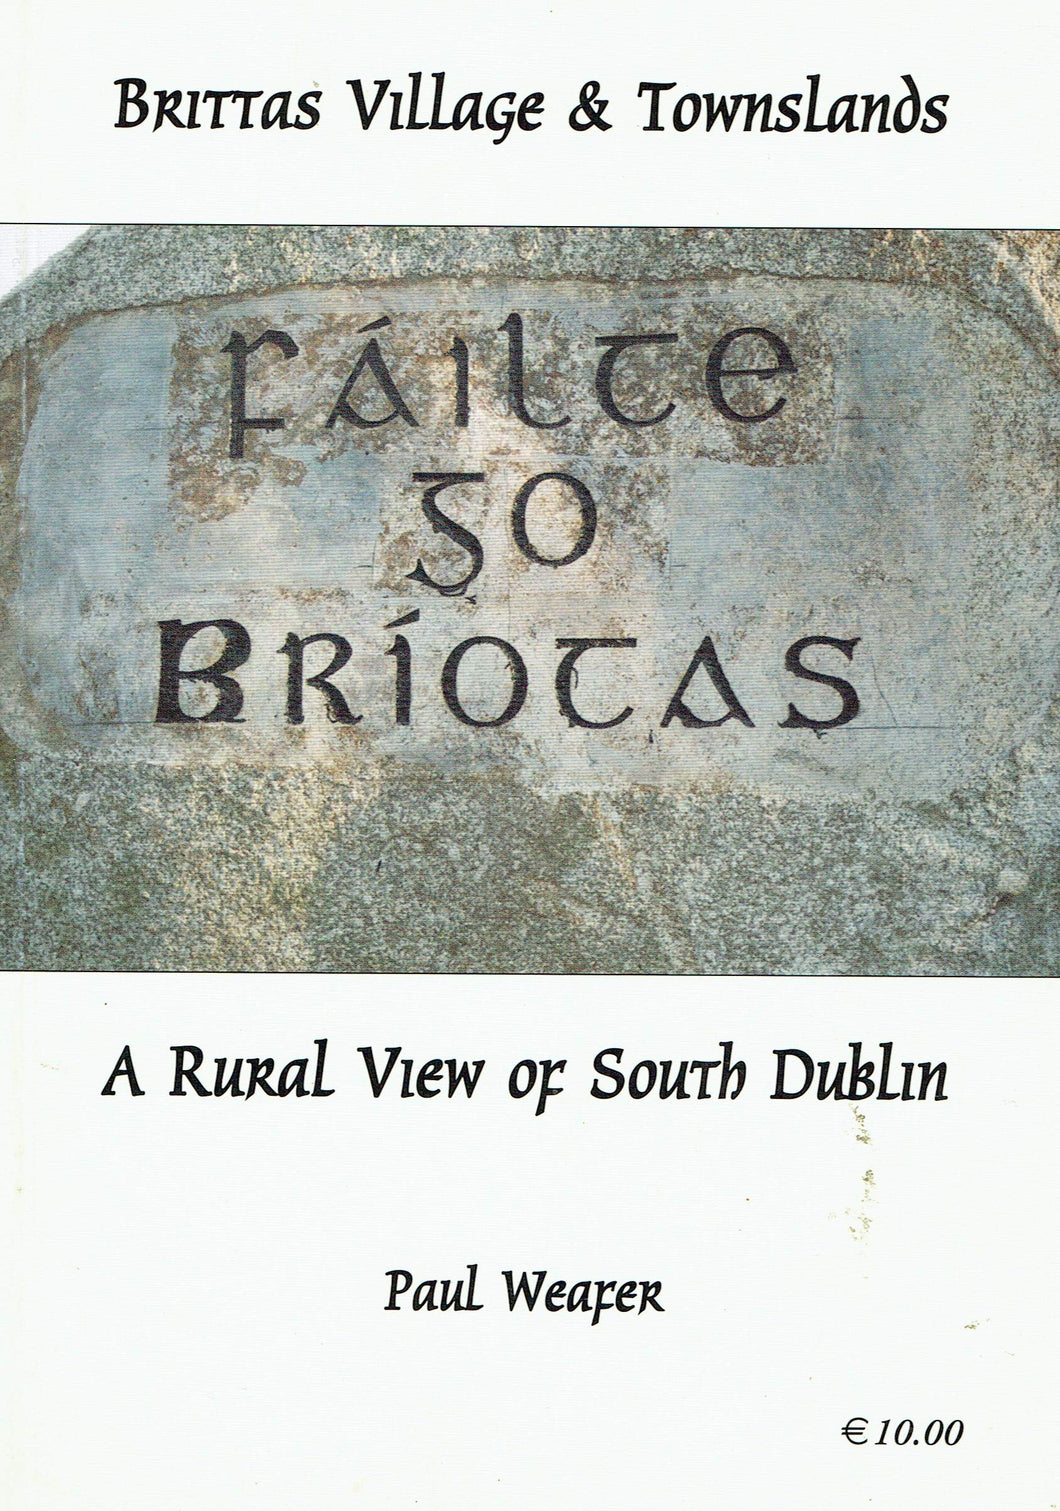 Brittas Village and Townslands: A Rural View of South Dublin